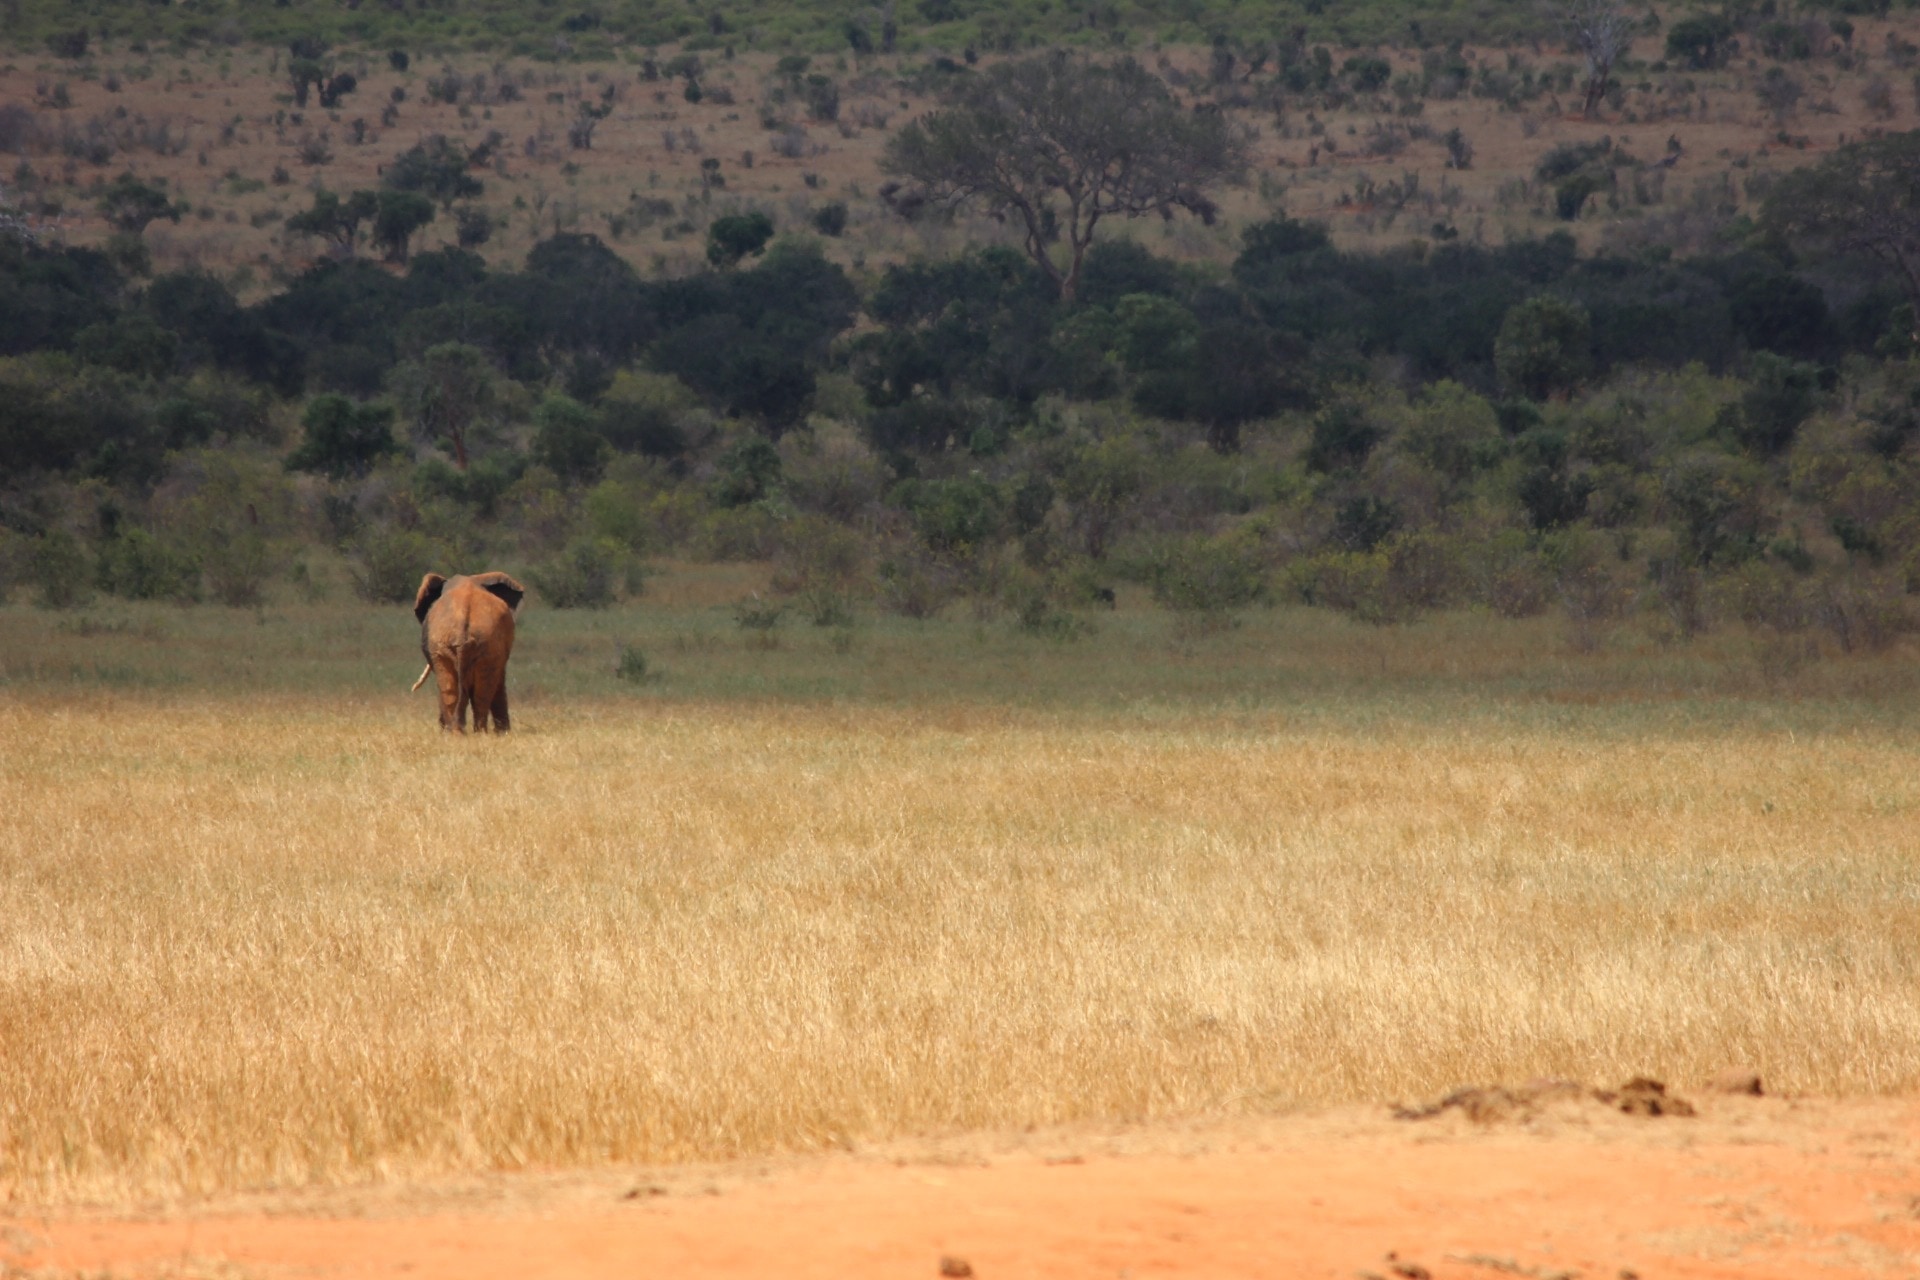 gray elephant and grass field